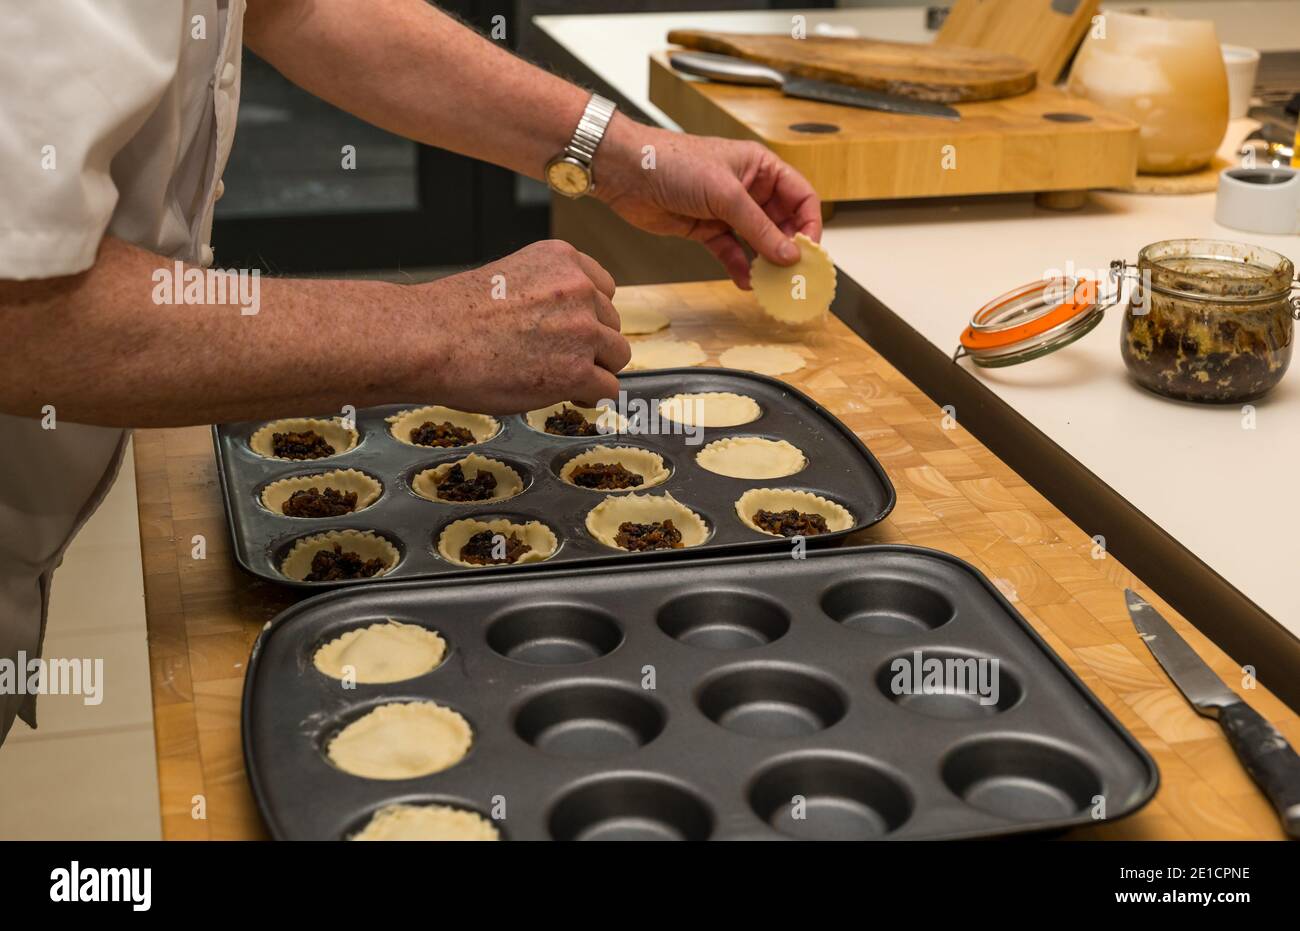 Man's hands filling pastry cases in baking tins with mincemeat to make mince pies at Christmas time Stock Photo